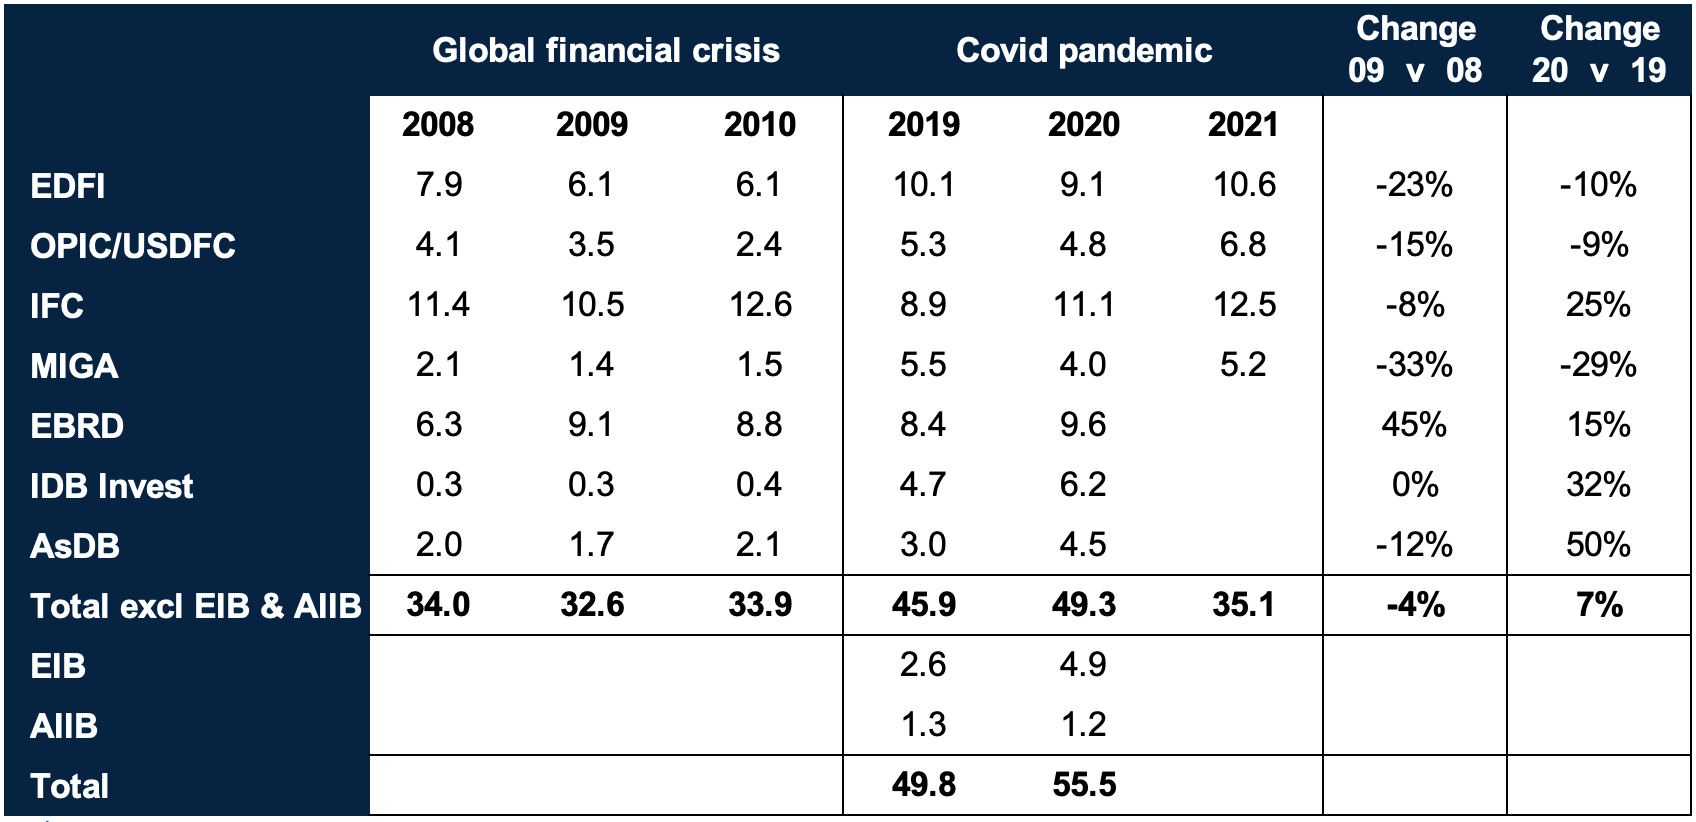 DFI response to global financial crisis and Covid-19 pandemic compared